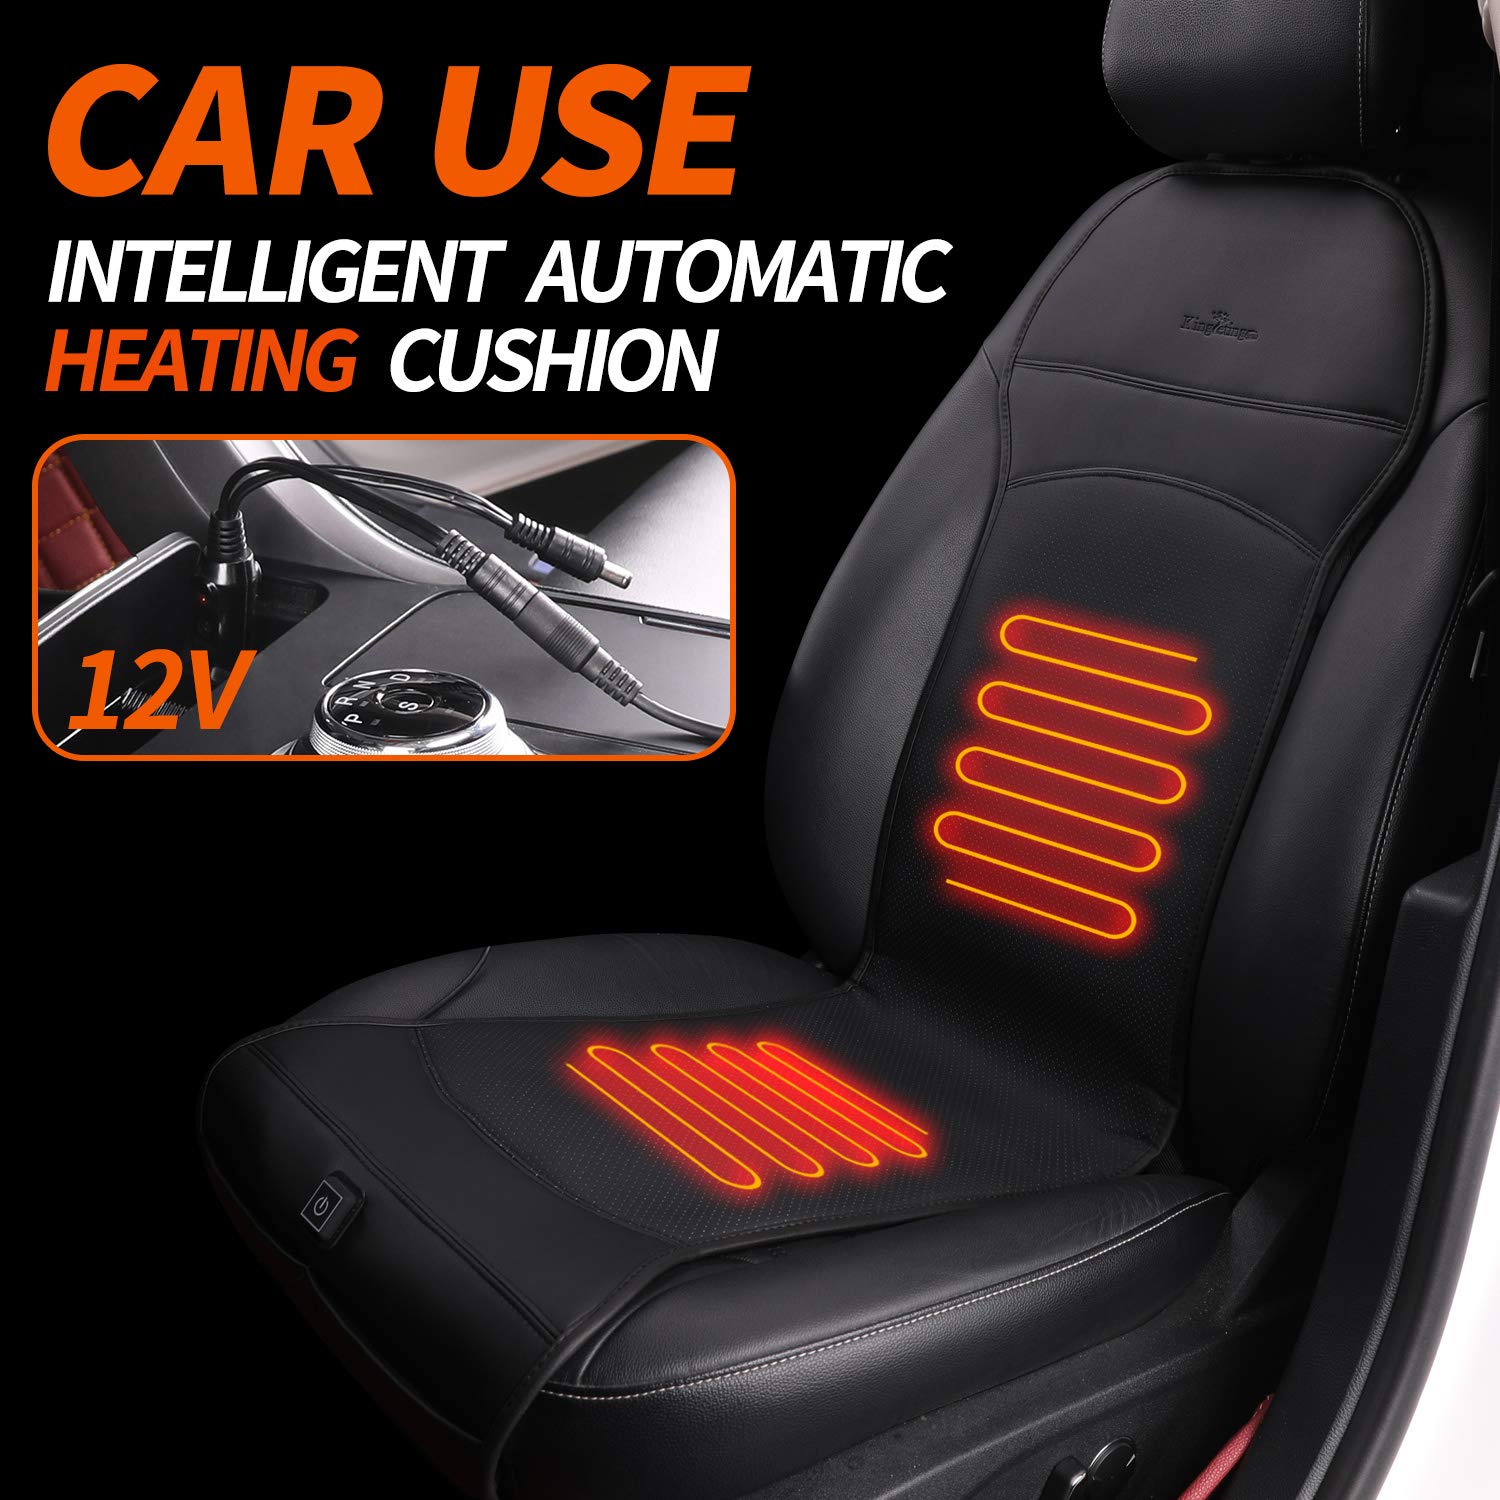 Kingleting Heated Seat Cushion with Pressure-Sensitive Switch,Heat Seat Cover for Home, Office Chair and More ‎LYLX01